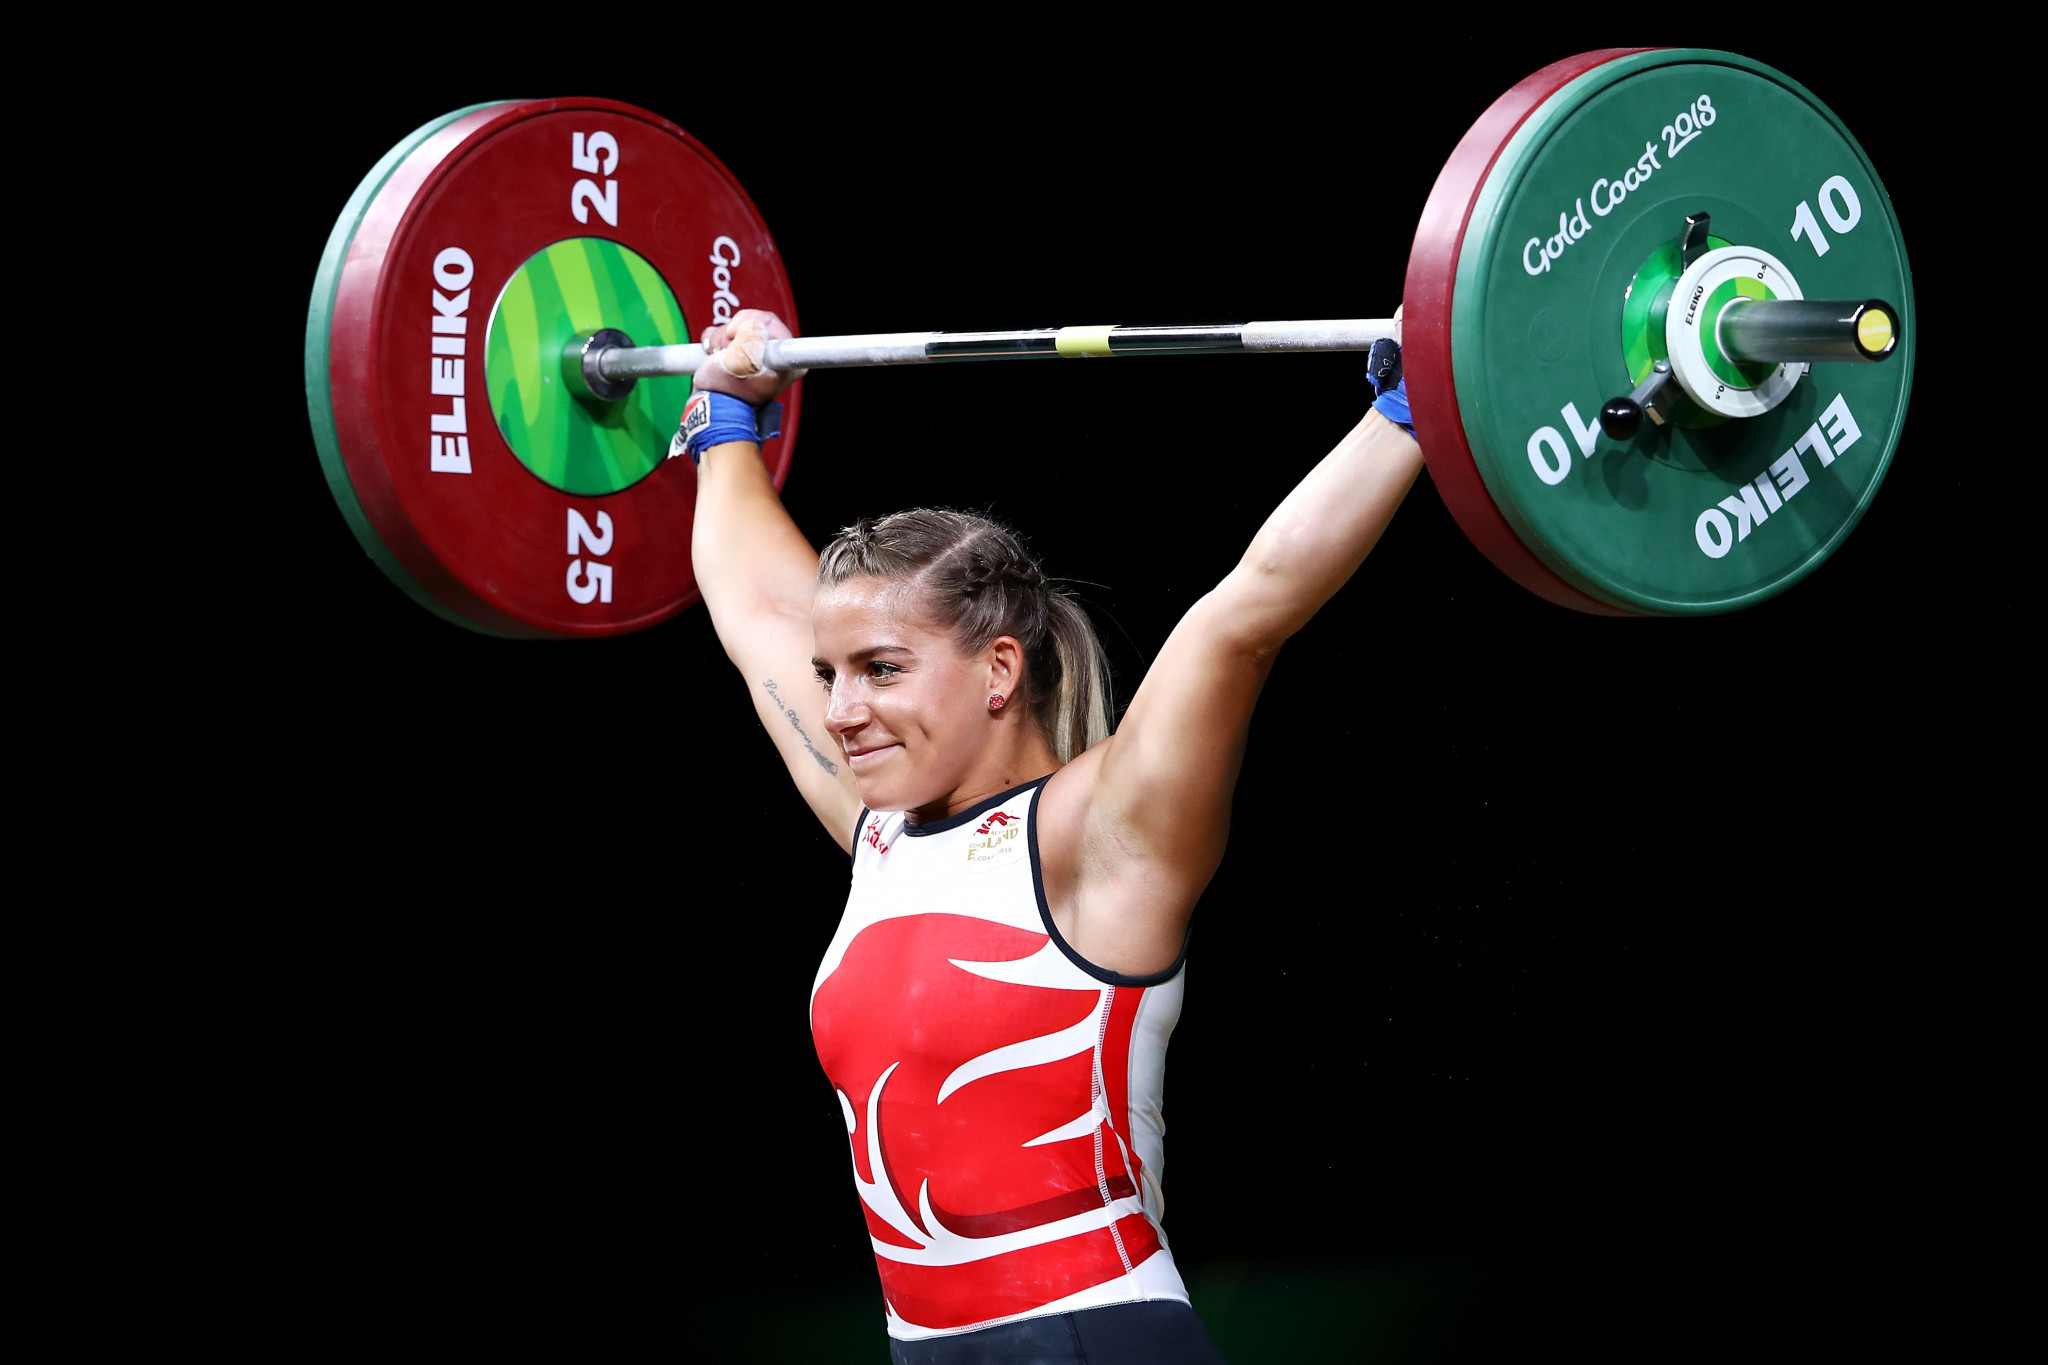 England's Emily Godley produced six good lifts out of six to win the women's 75kg event ©Getty Images